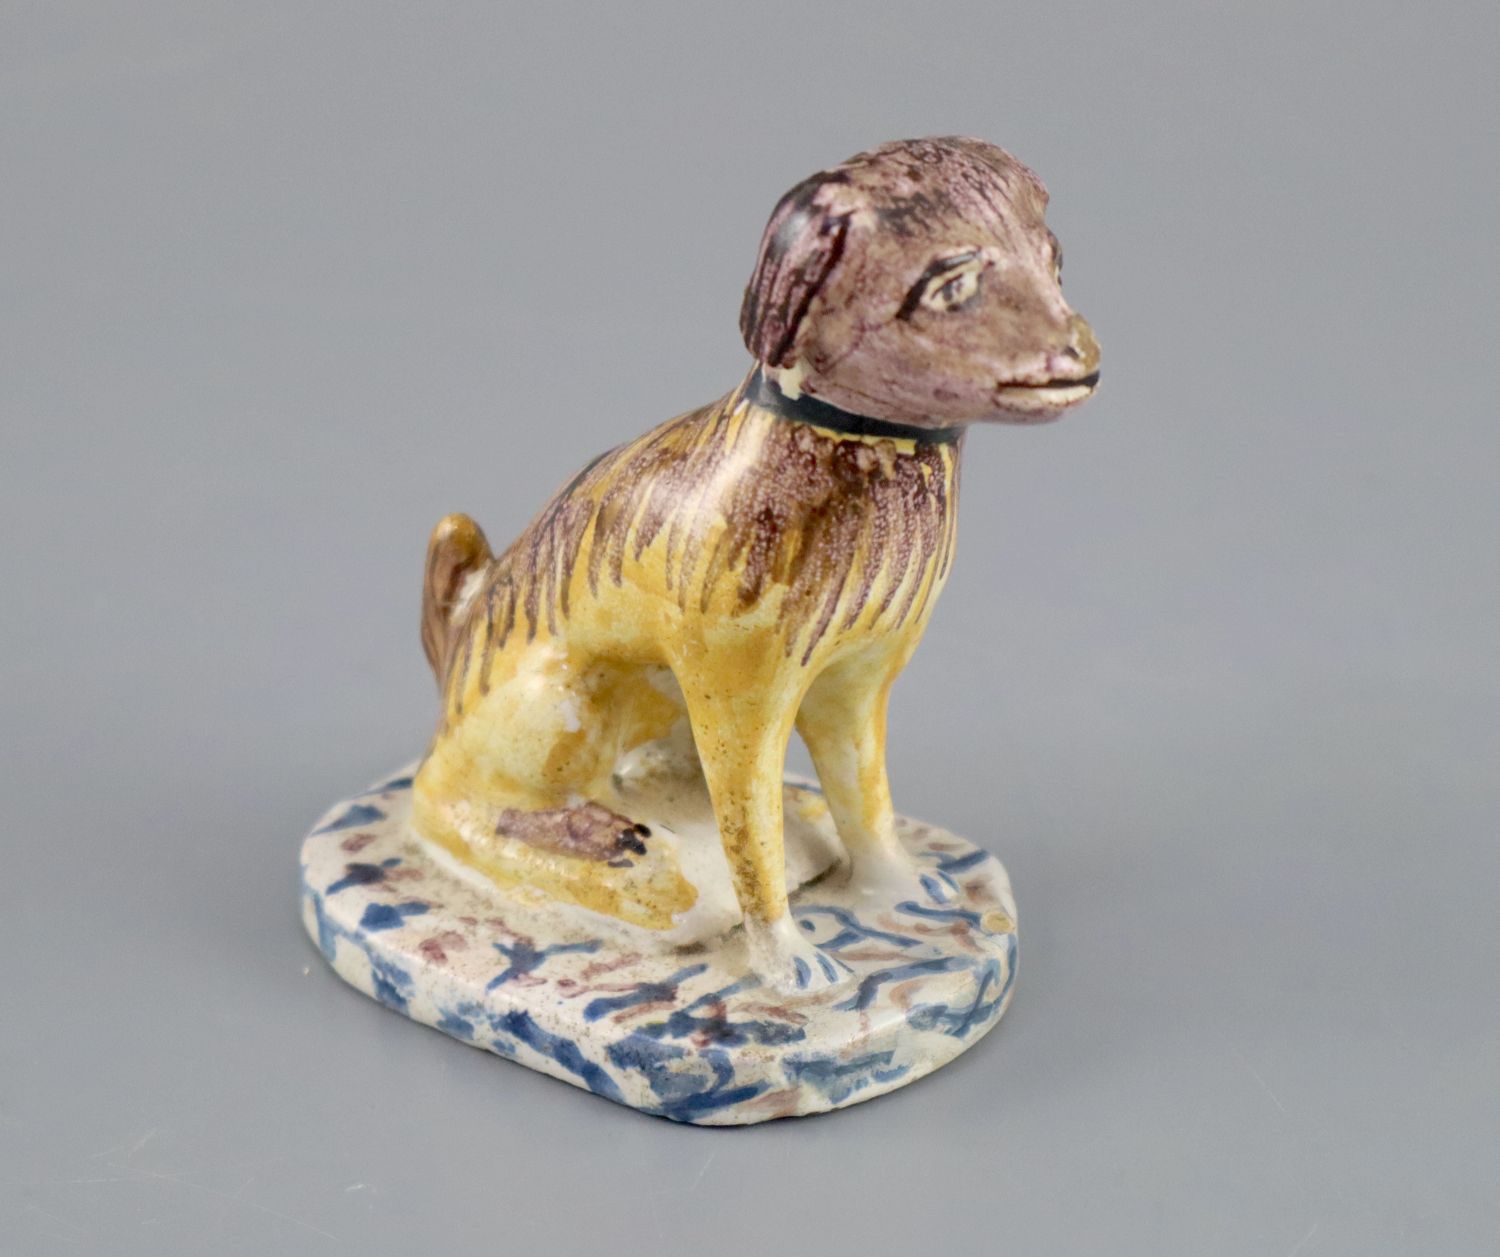 A Continental faience model of a seated dog, mid 18th century, possibly Brussels,CONDITION: